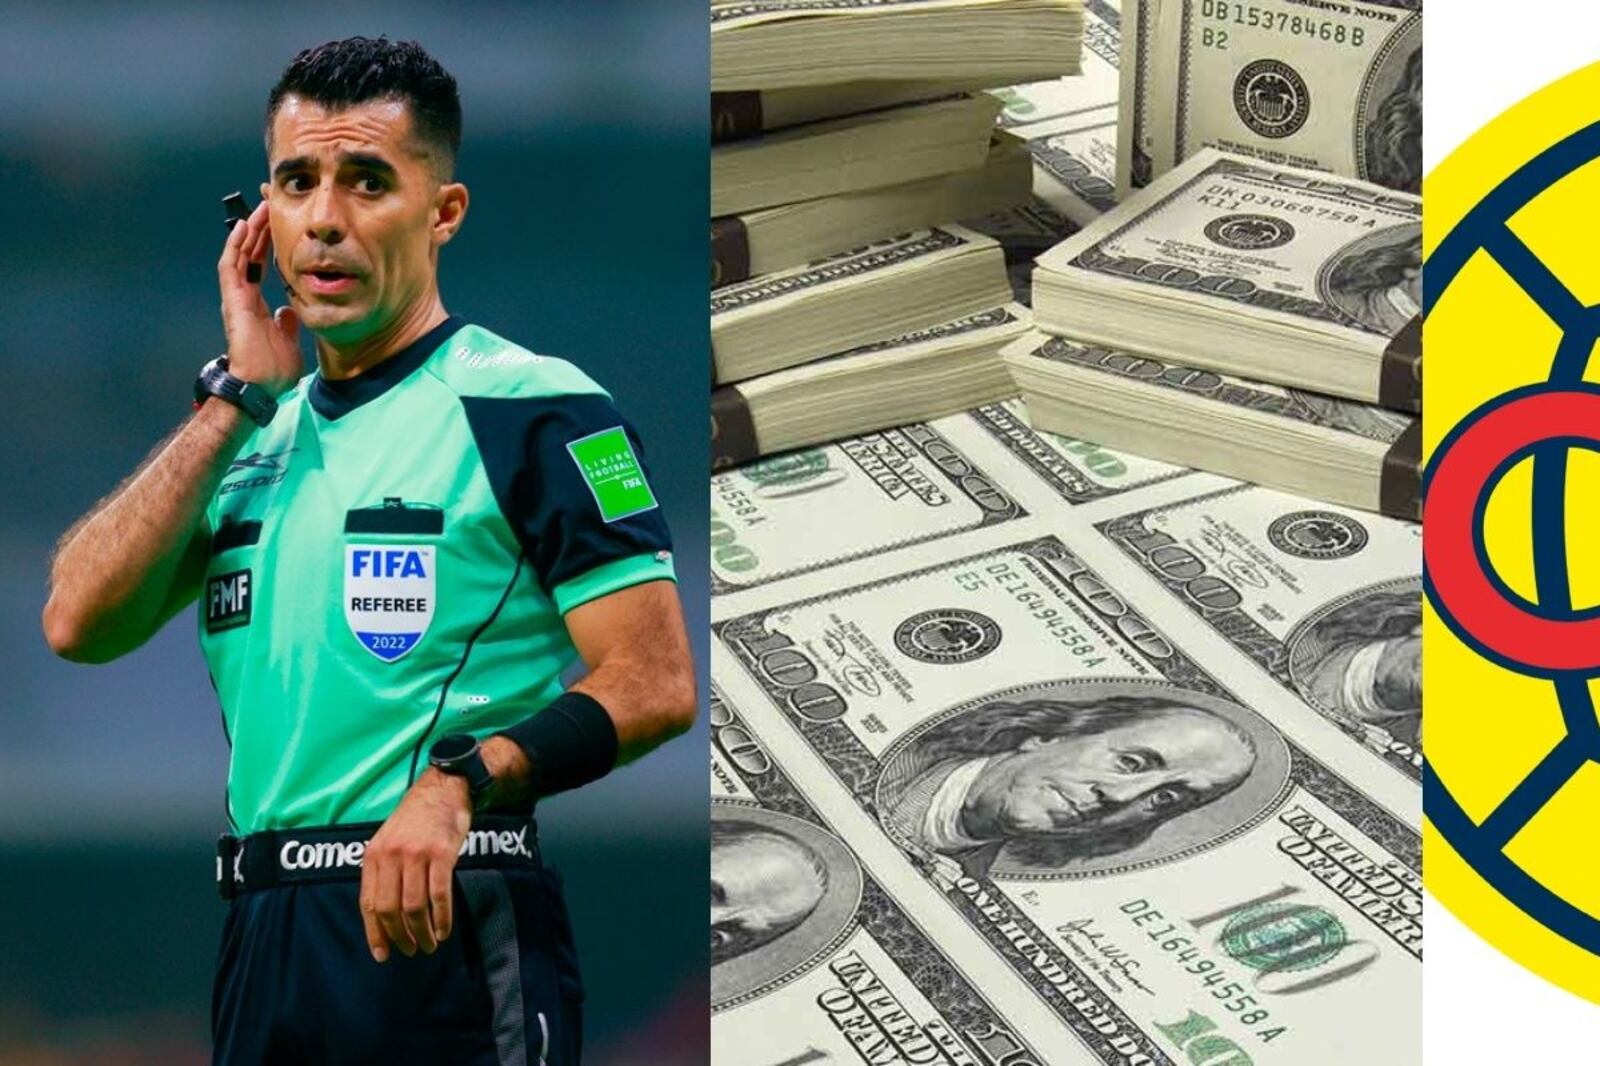 Adonai Escobedo makes mistakes against América and this amount he received for working